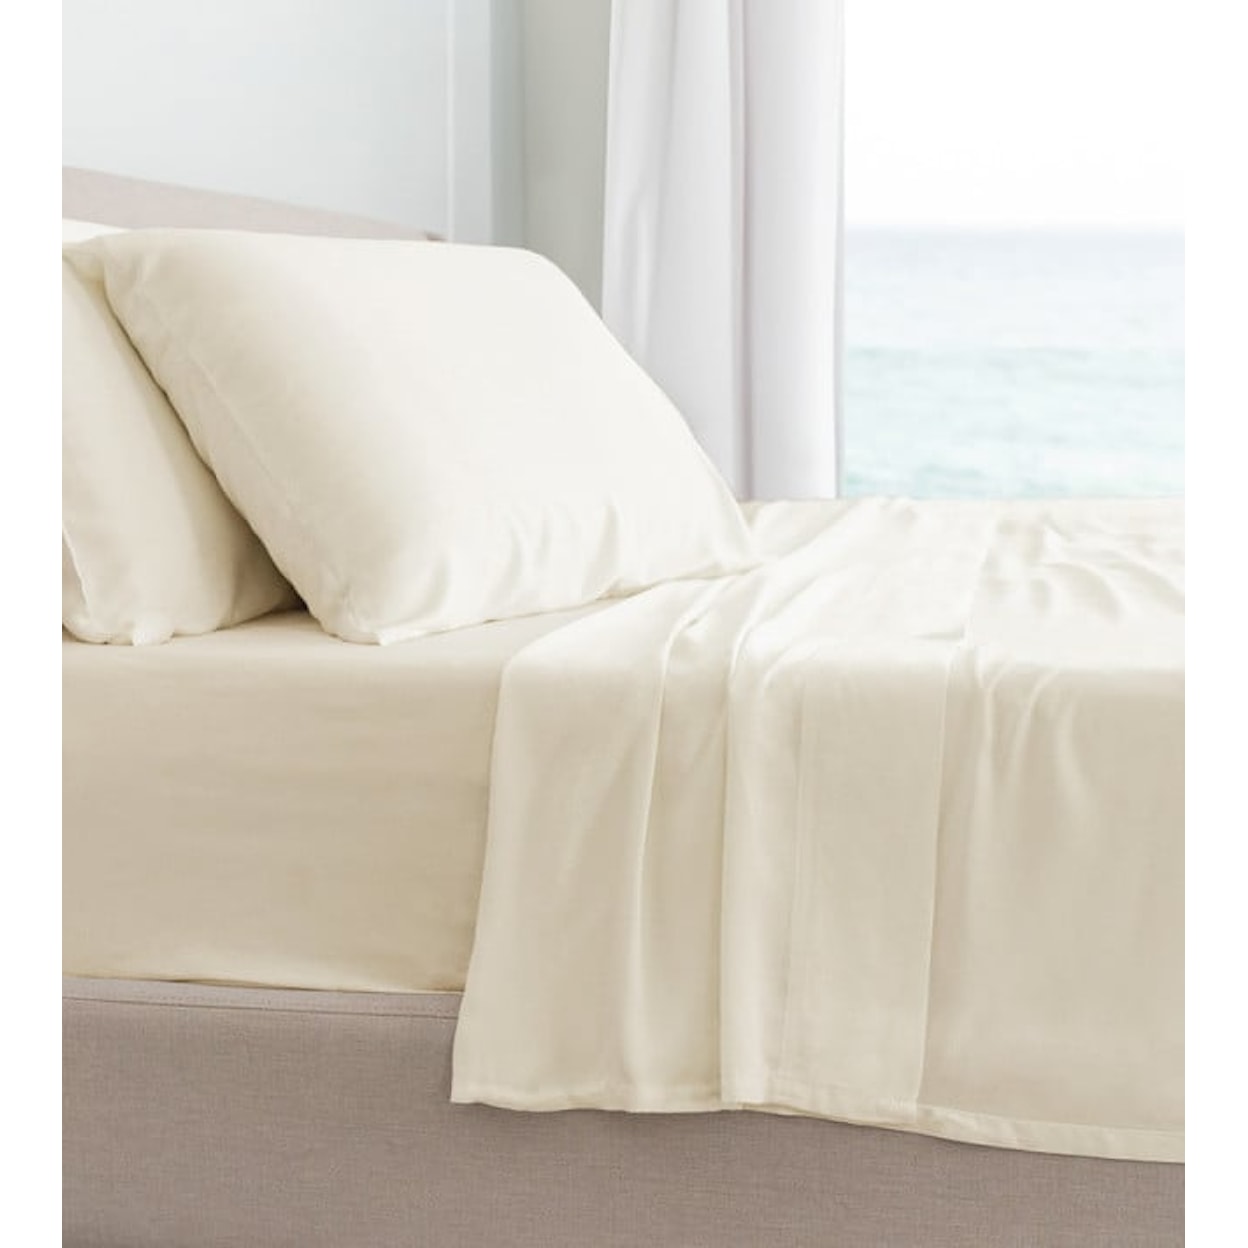 Cariloha Classic Bamboo Bed Sheet Set Queen Classic Bamboo Sheet Set in Ivory